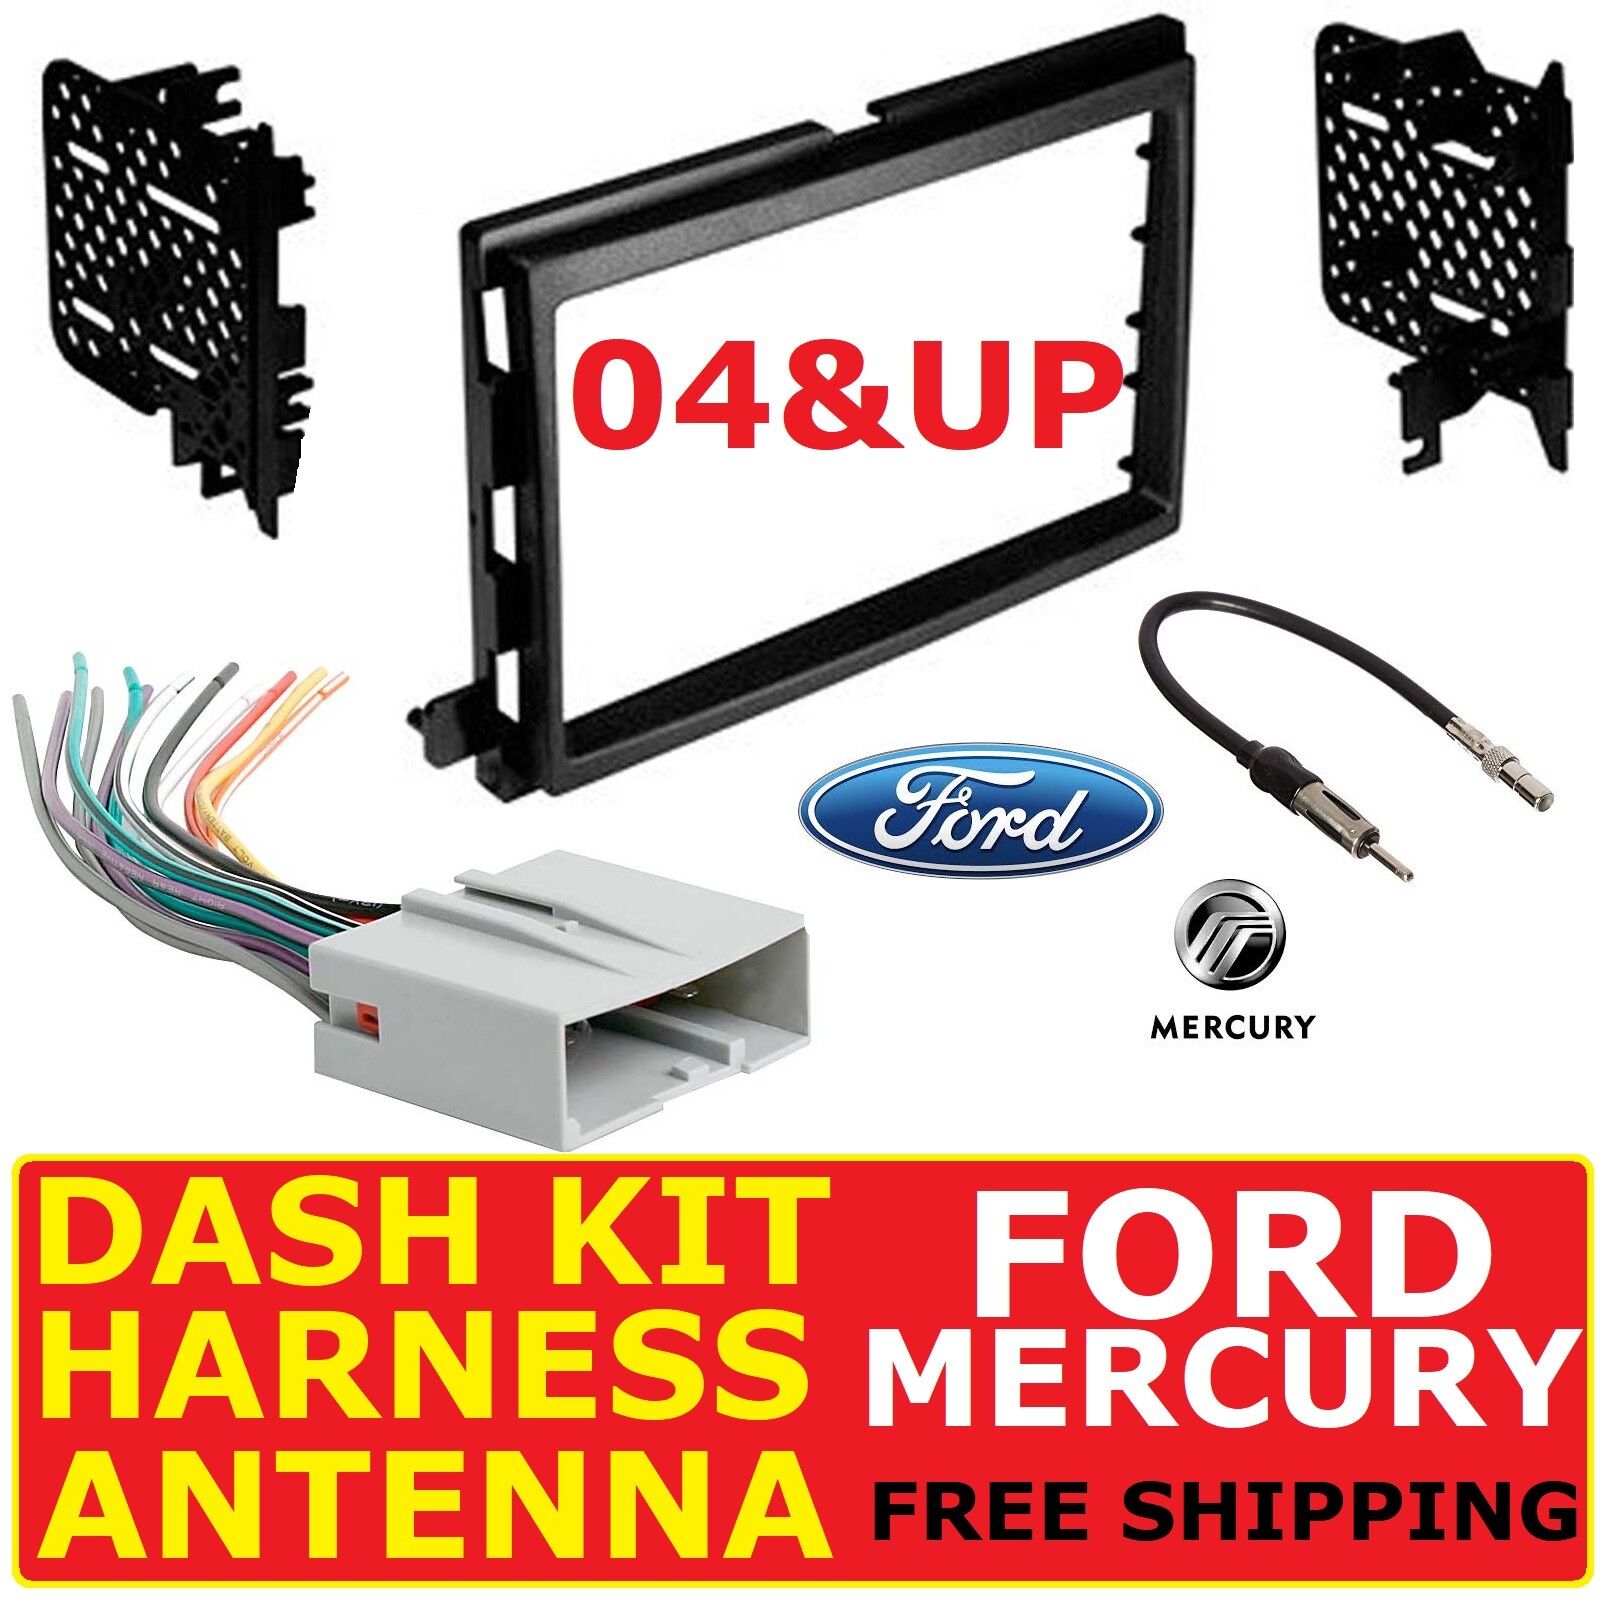 2004 &UP SELECT FORD 2-DIN DOUBLE DIN CAR RADIO STEREO INSTALLATION DASH KIT PKG